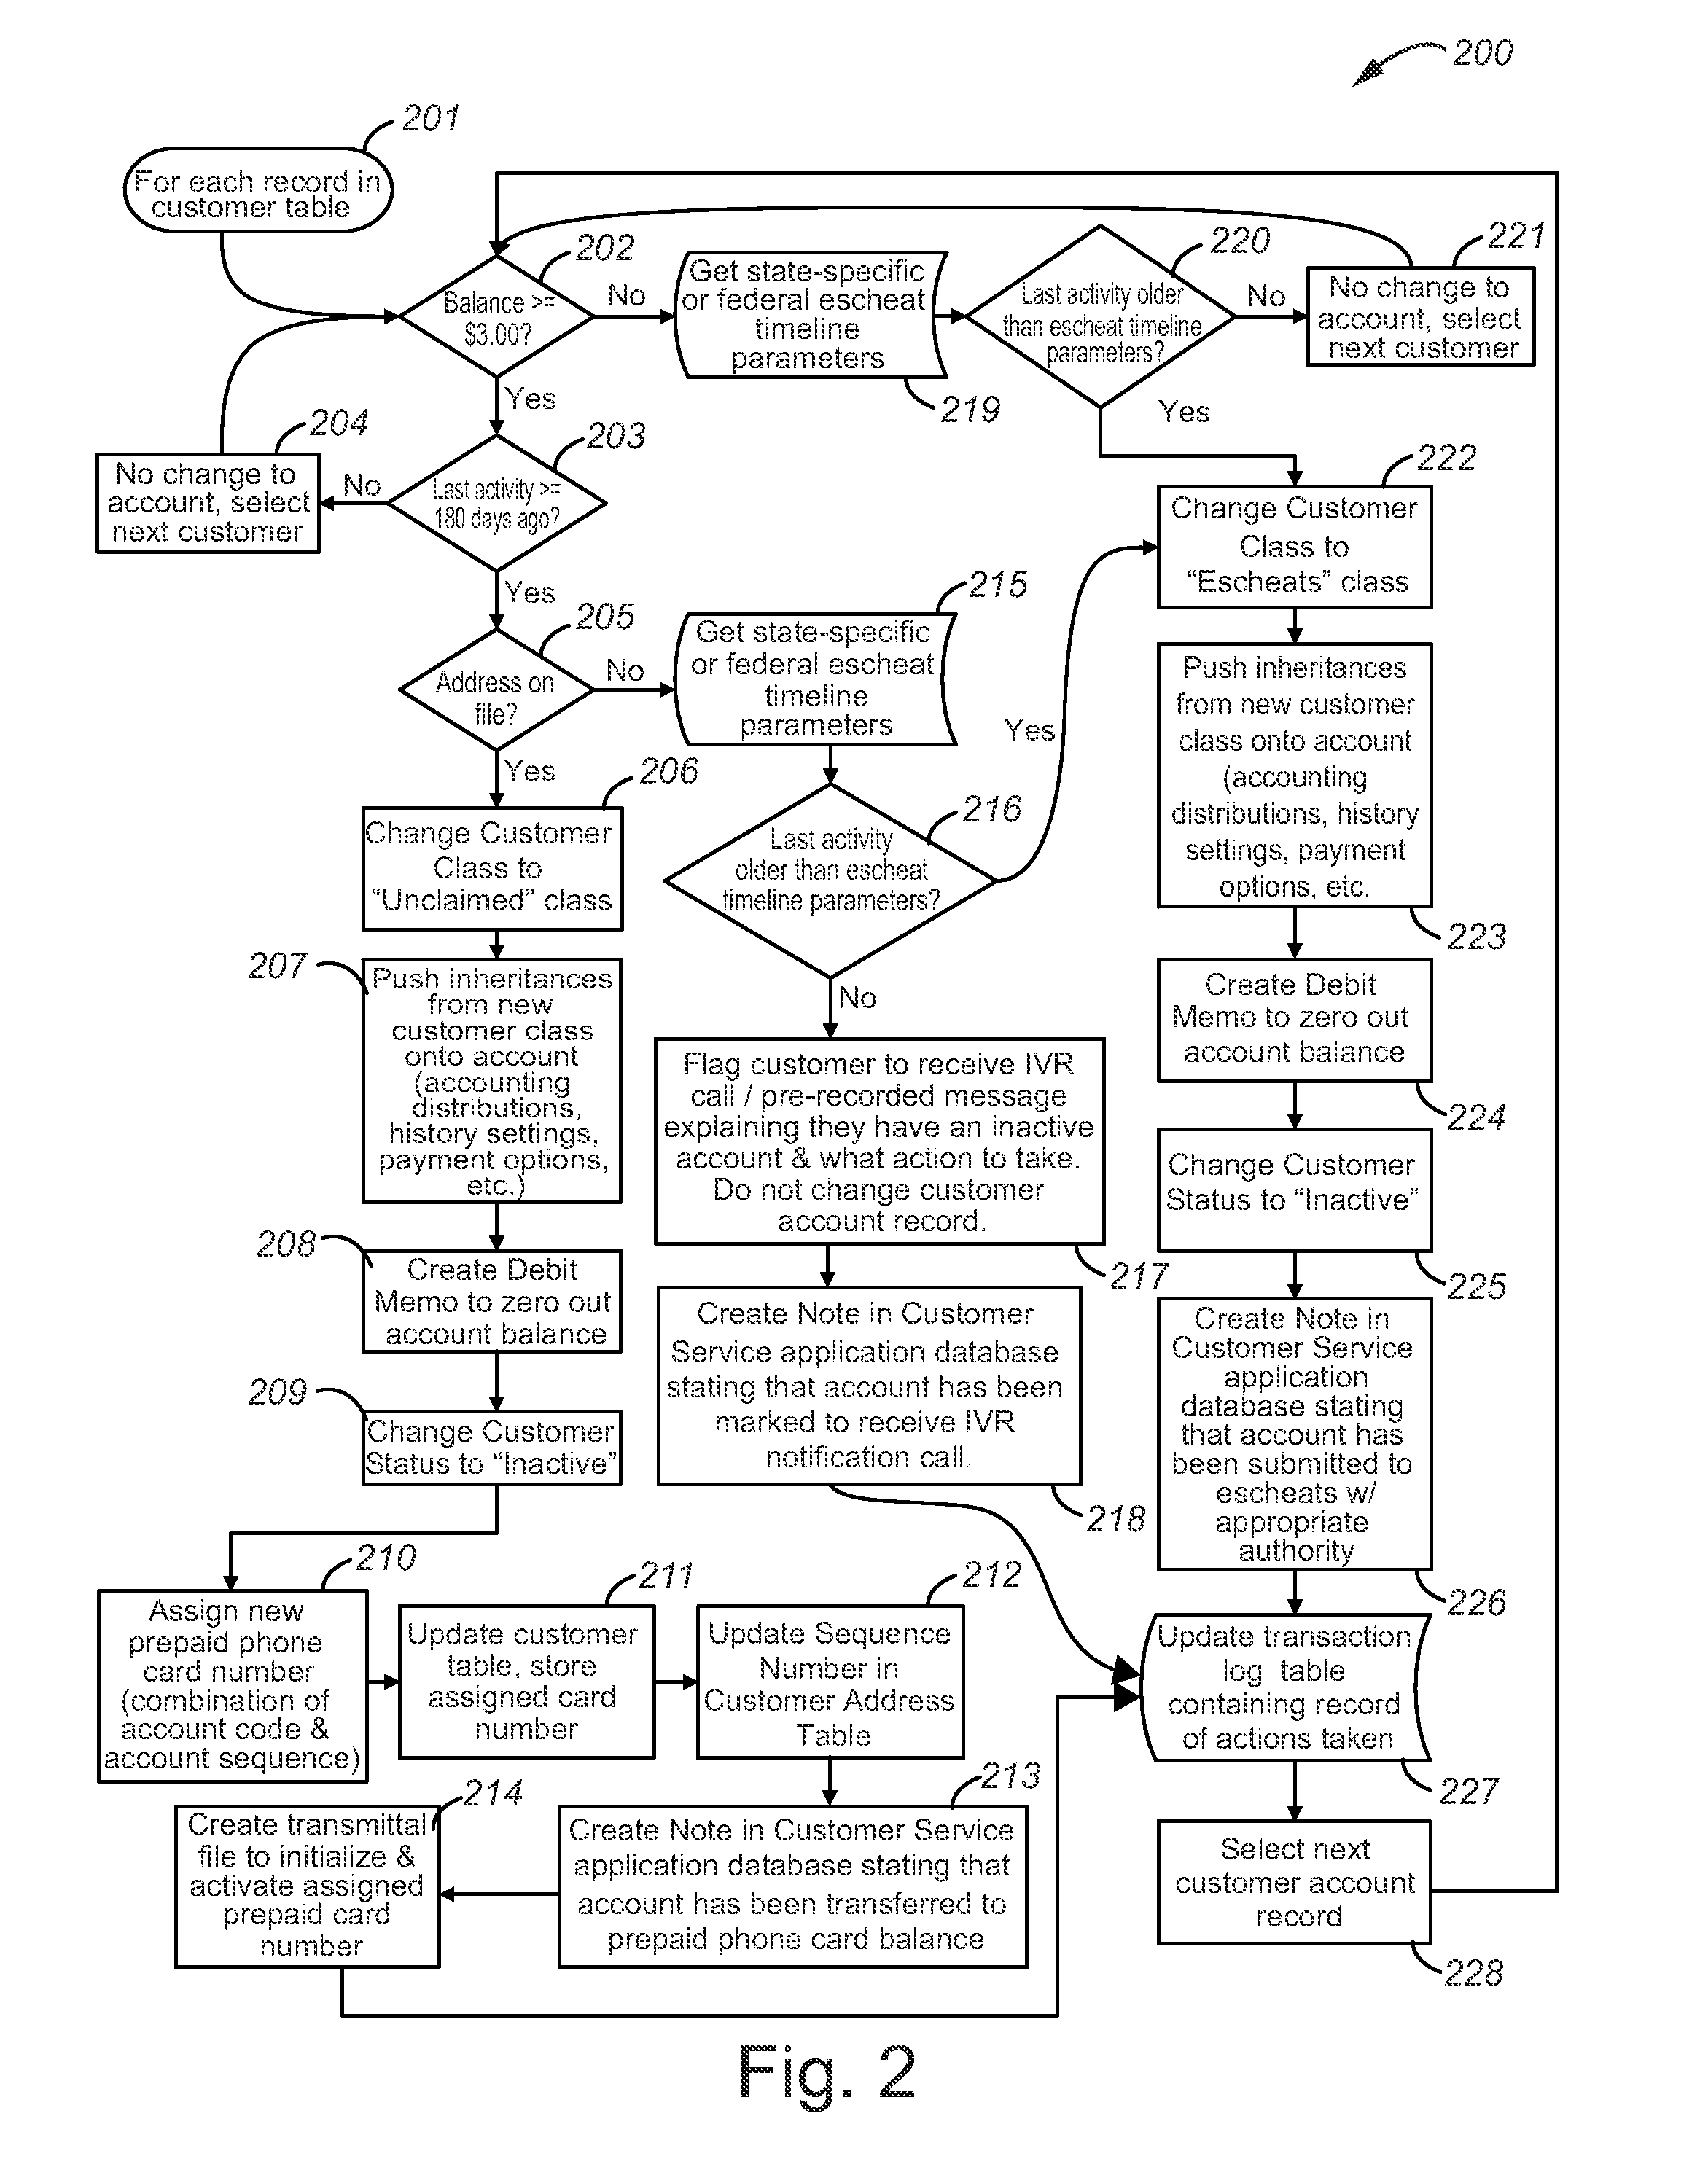 Systems and methods for treatment of inactive accounts